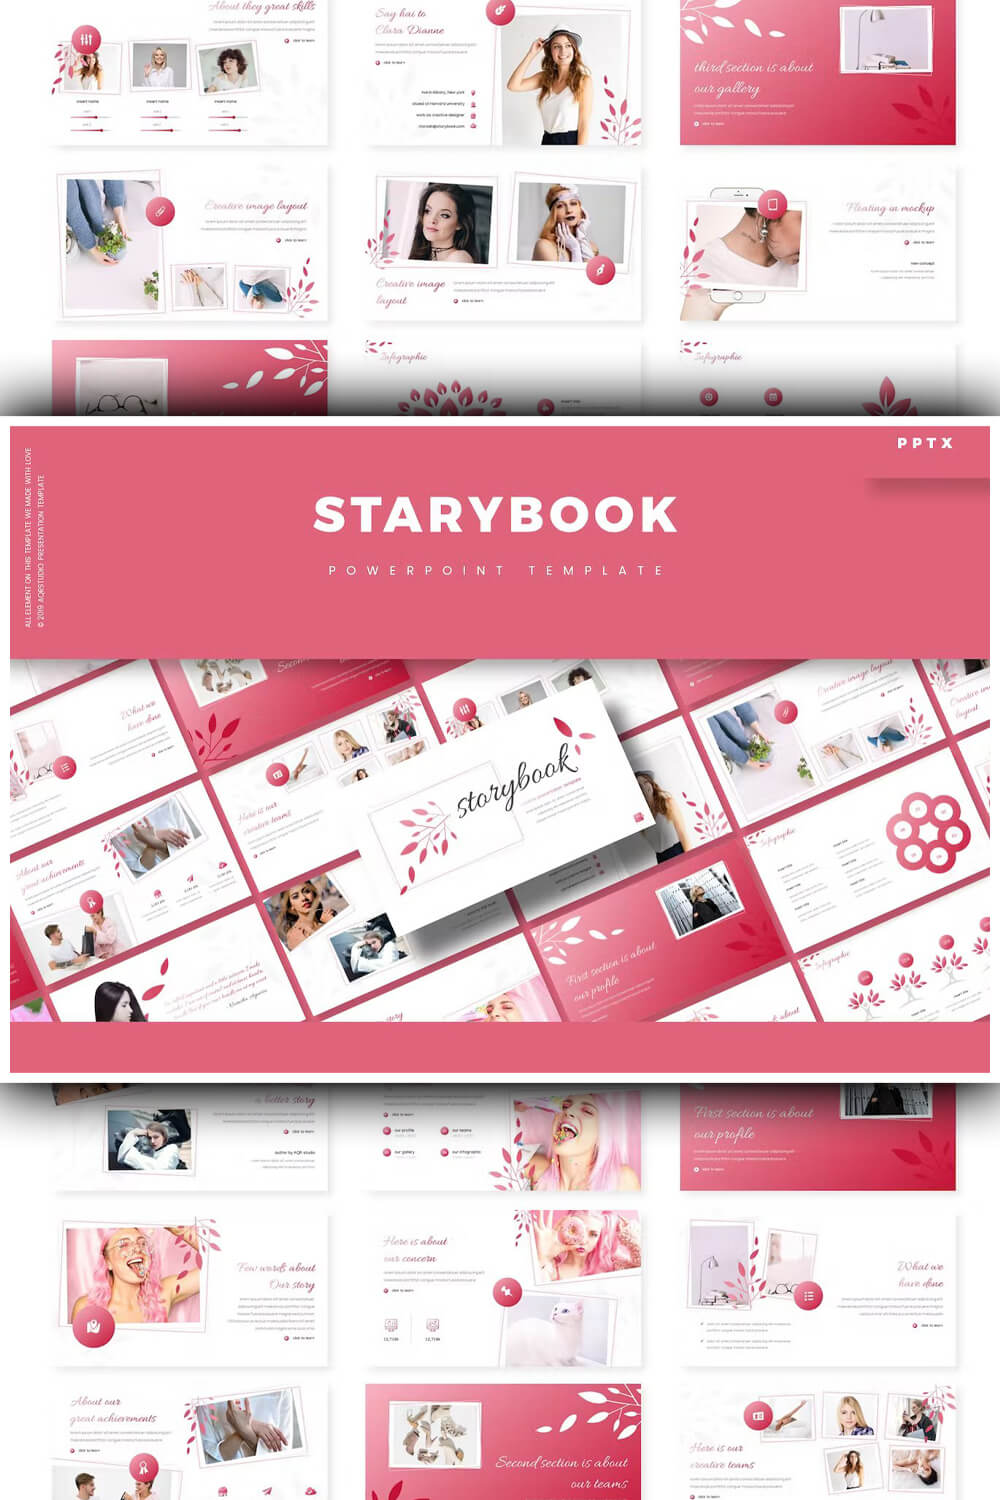 Starybook Powerpoint Template presentation slides with information about great skills.